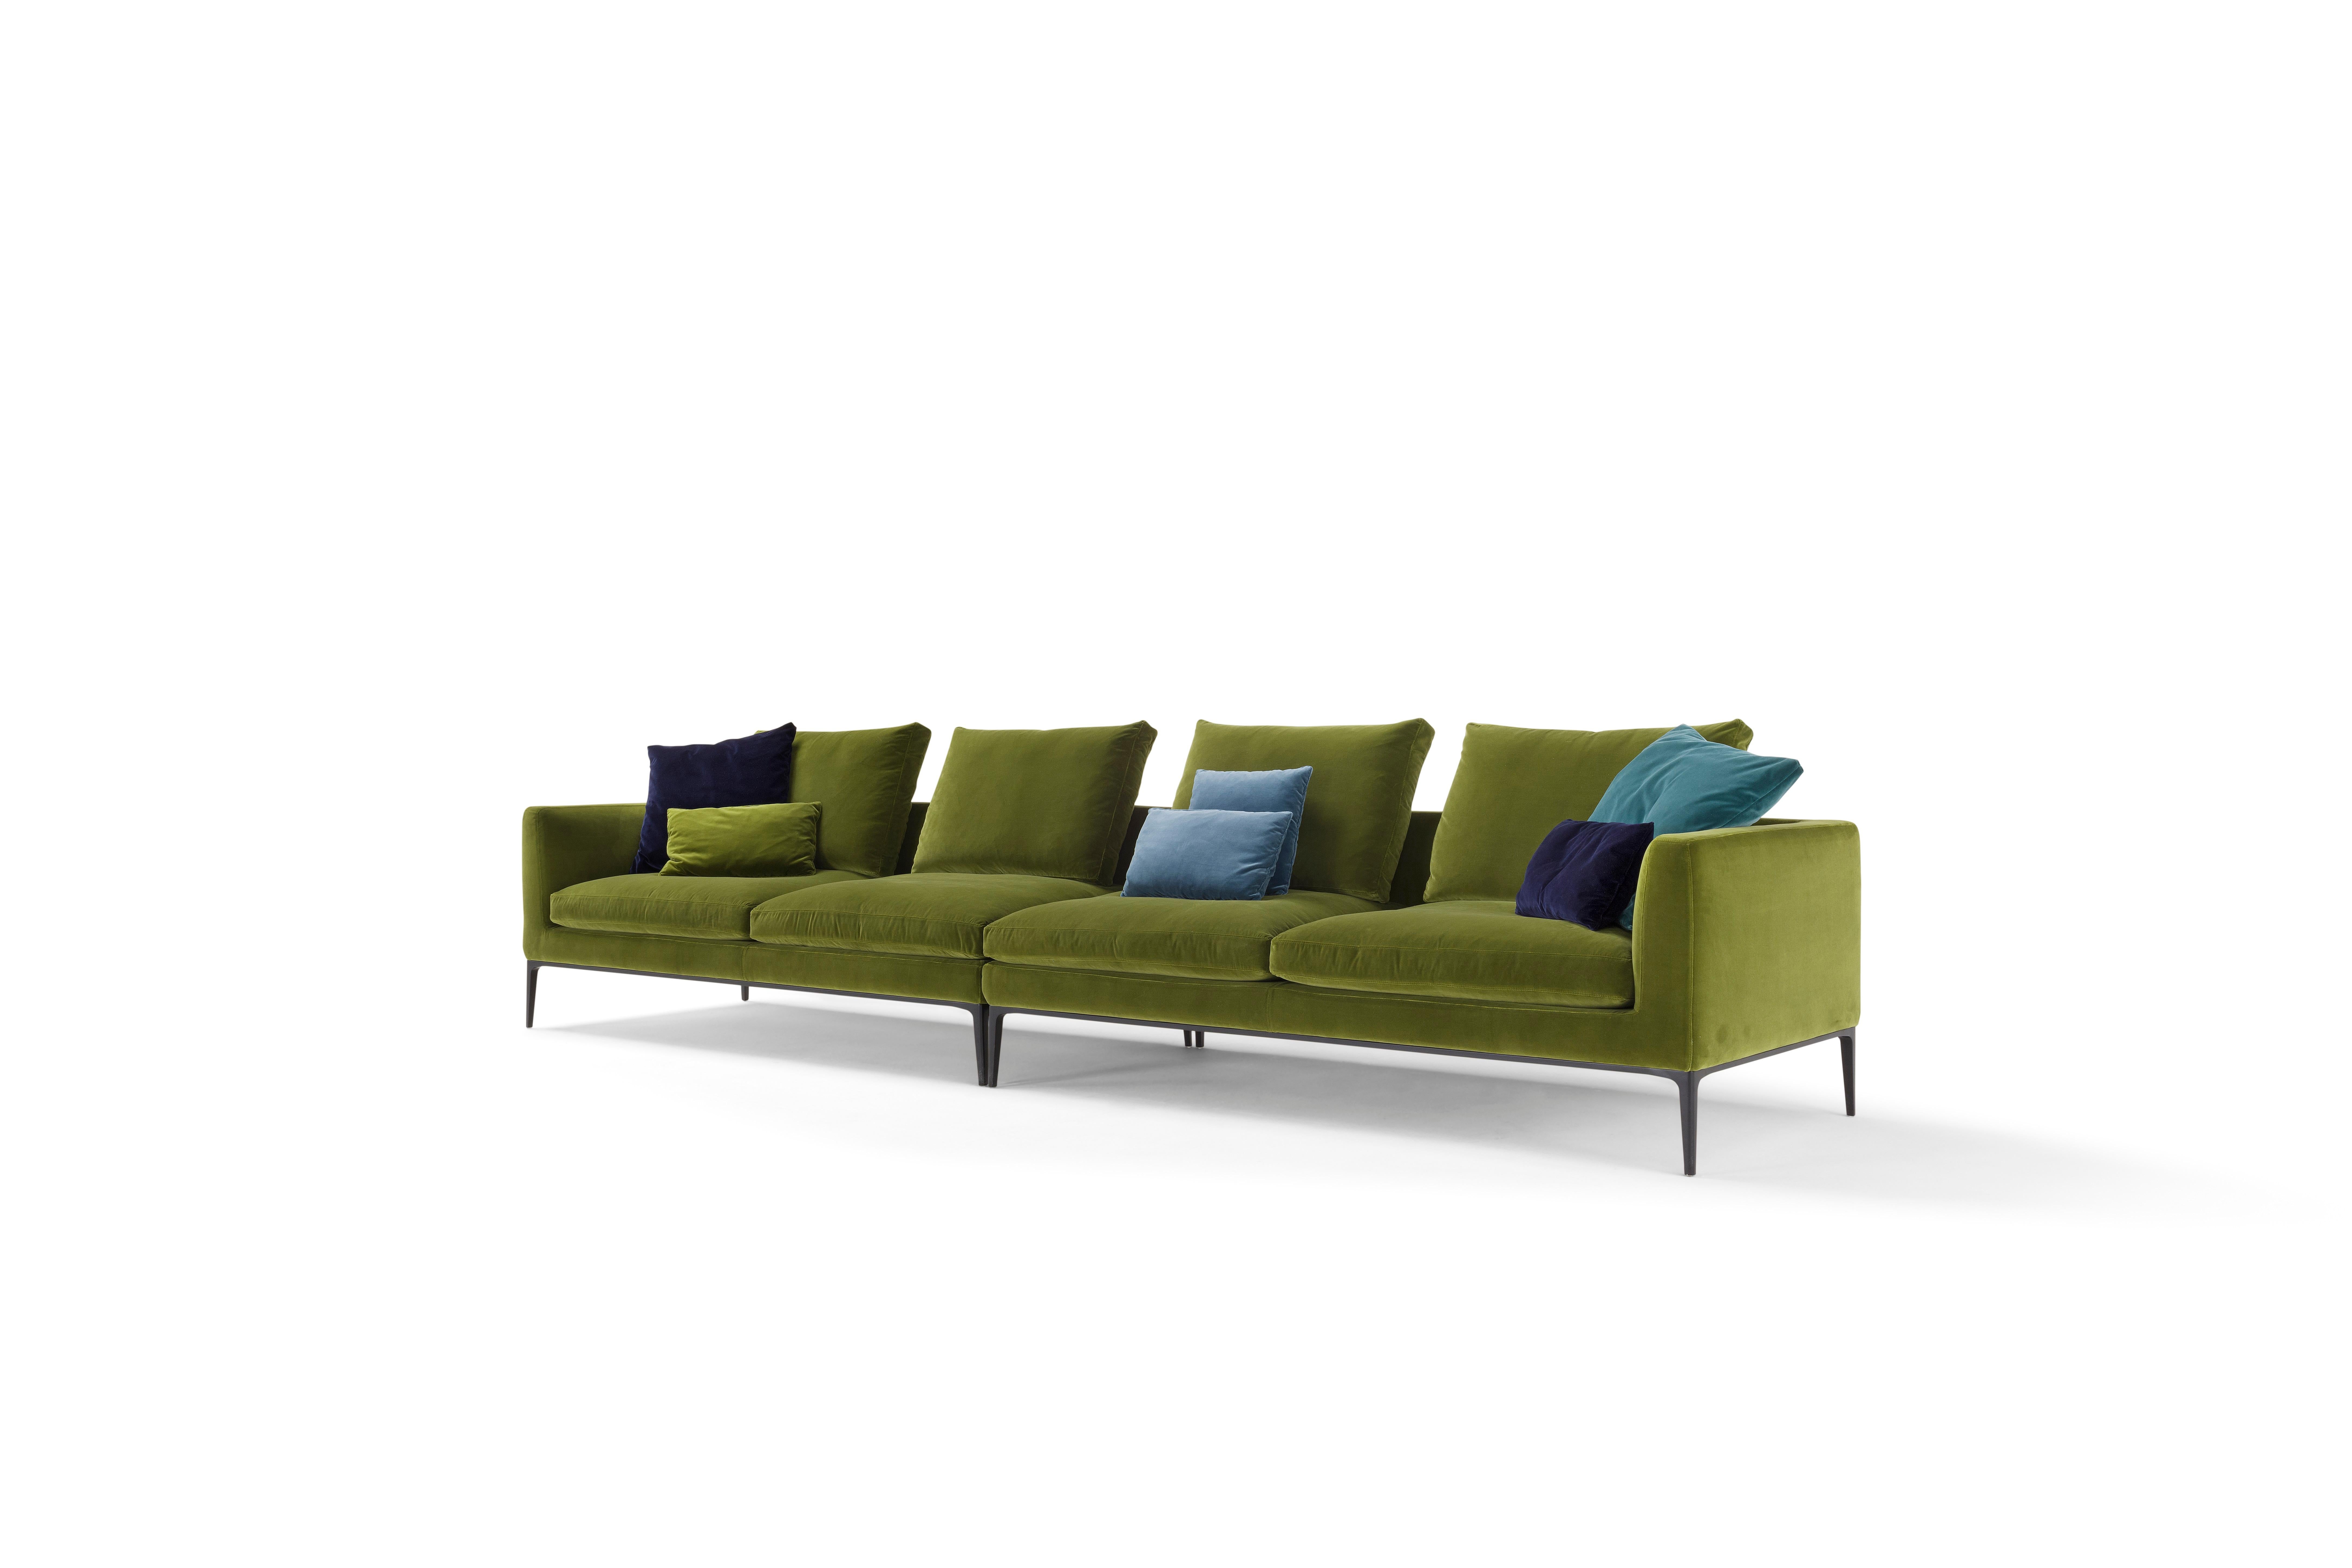 The Leonard collection is a seating system created by the defining of geometric volumes by an elegant silhouette. A continuous line draws the outline of each seat, backrest, and armrest that can accommodate soft and fluffy pillows. Utilizing a